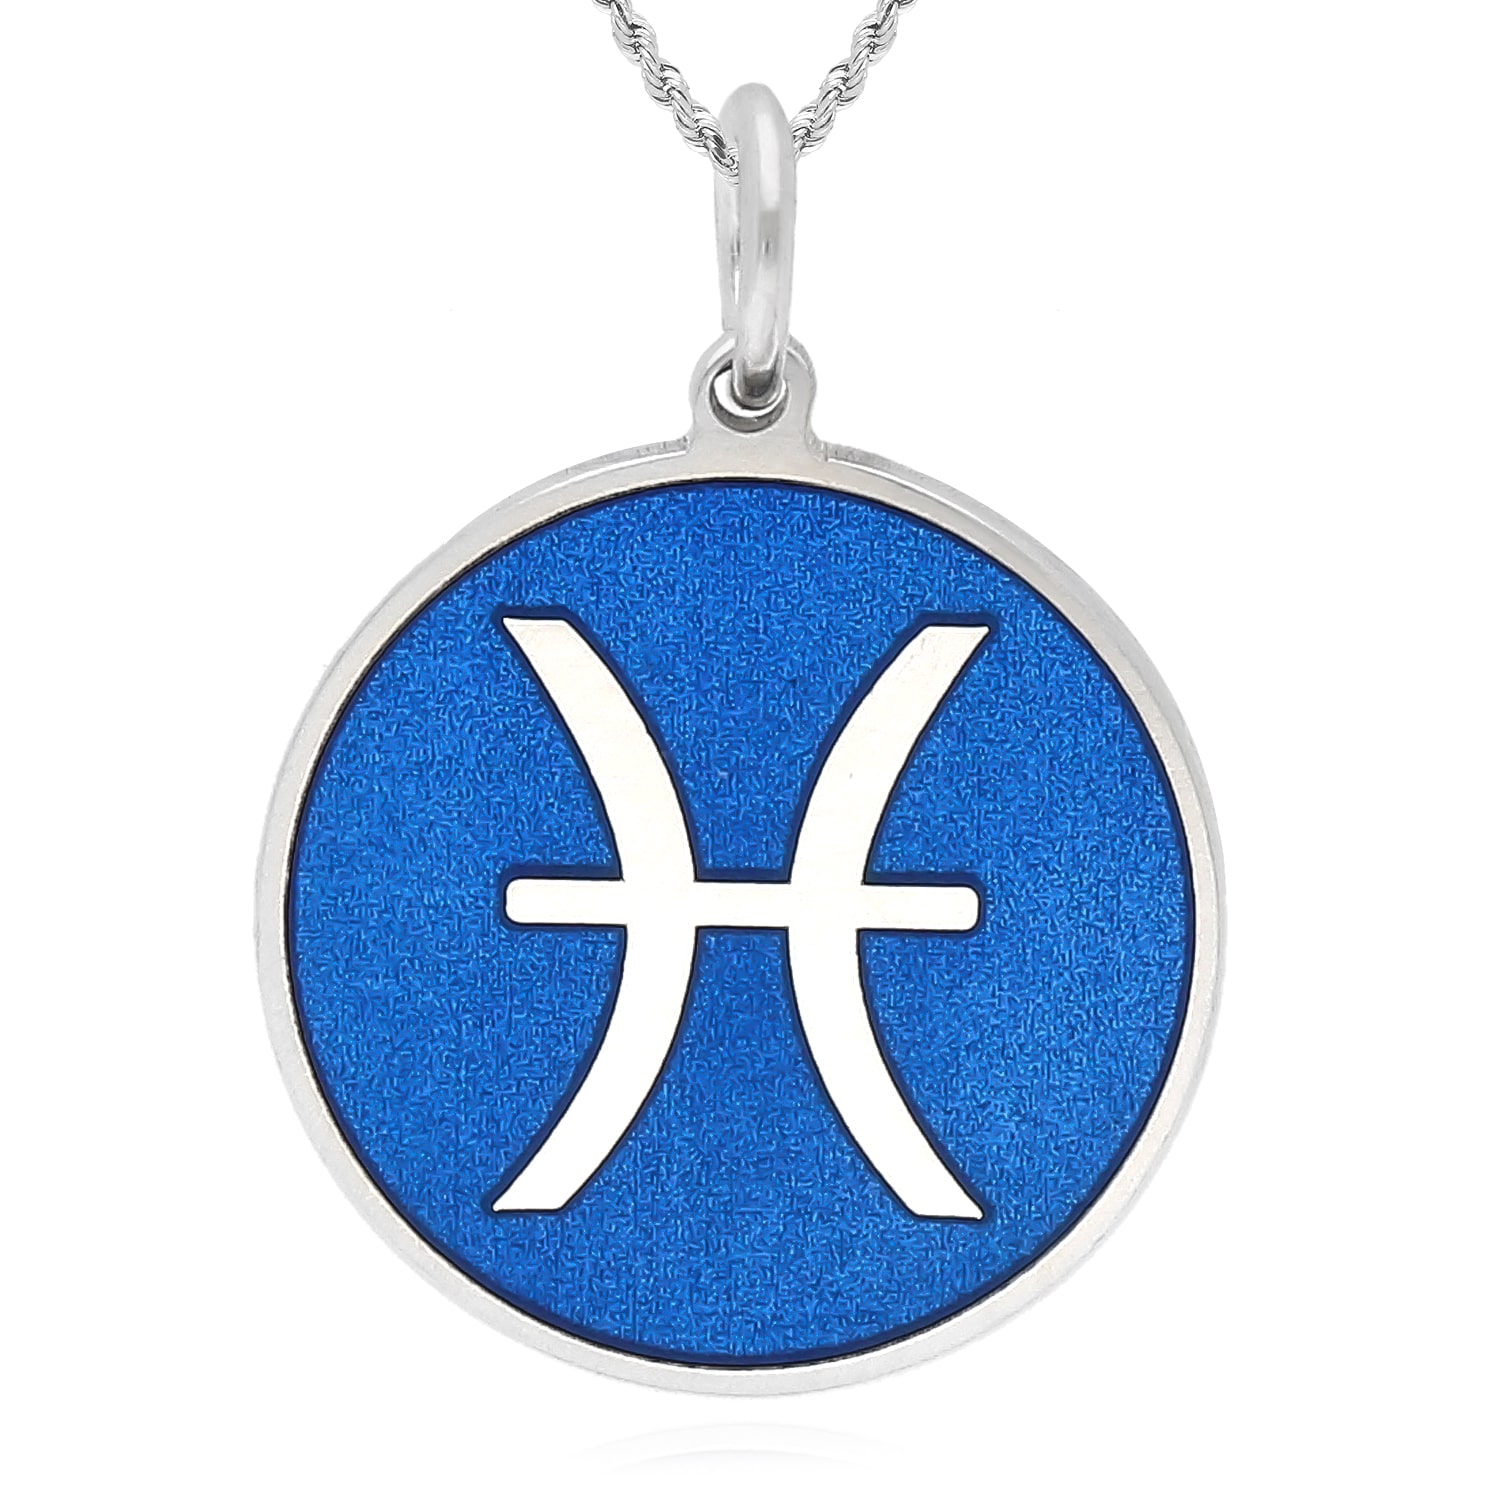 Sterling Silver Round Blue Zodiac Signs Pendant 0.7" - Pisces